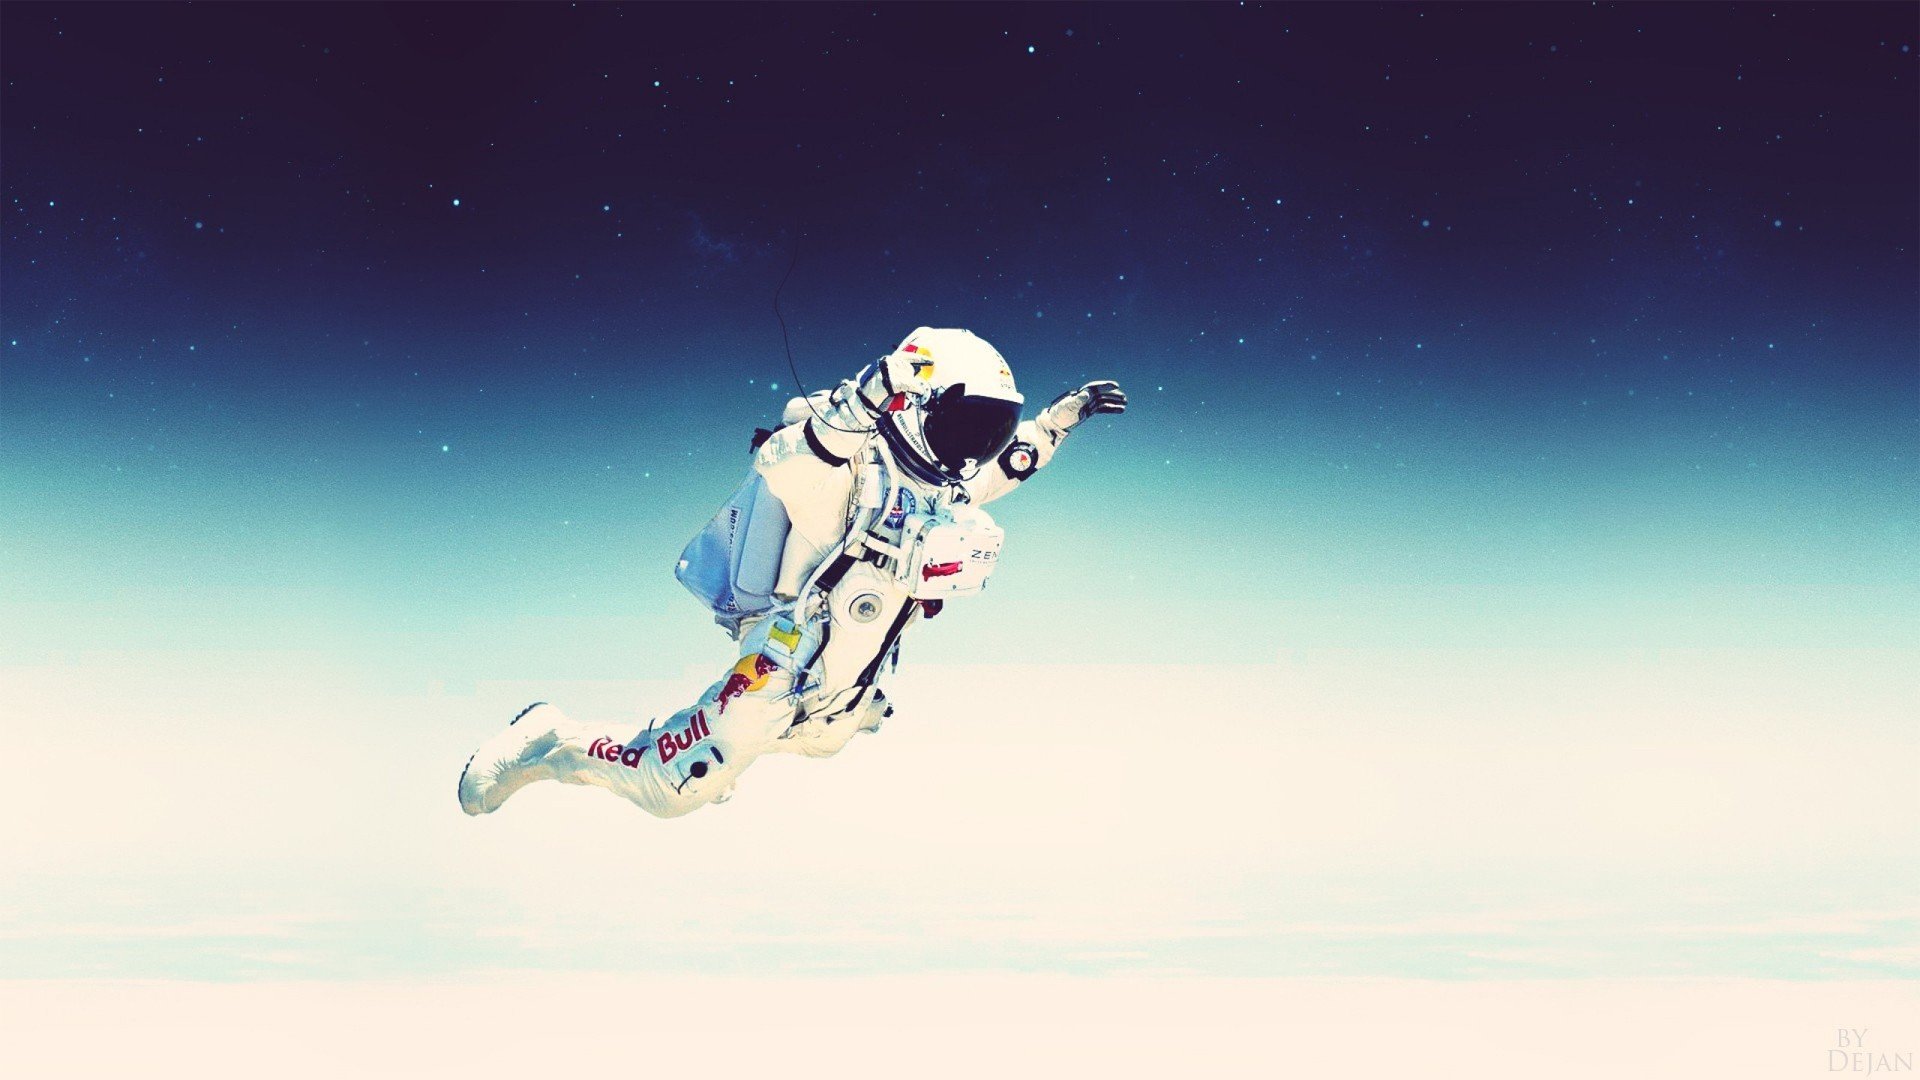 men, Space, Red Bull, Commercial, Jumping Wallpaper